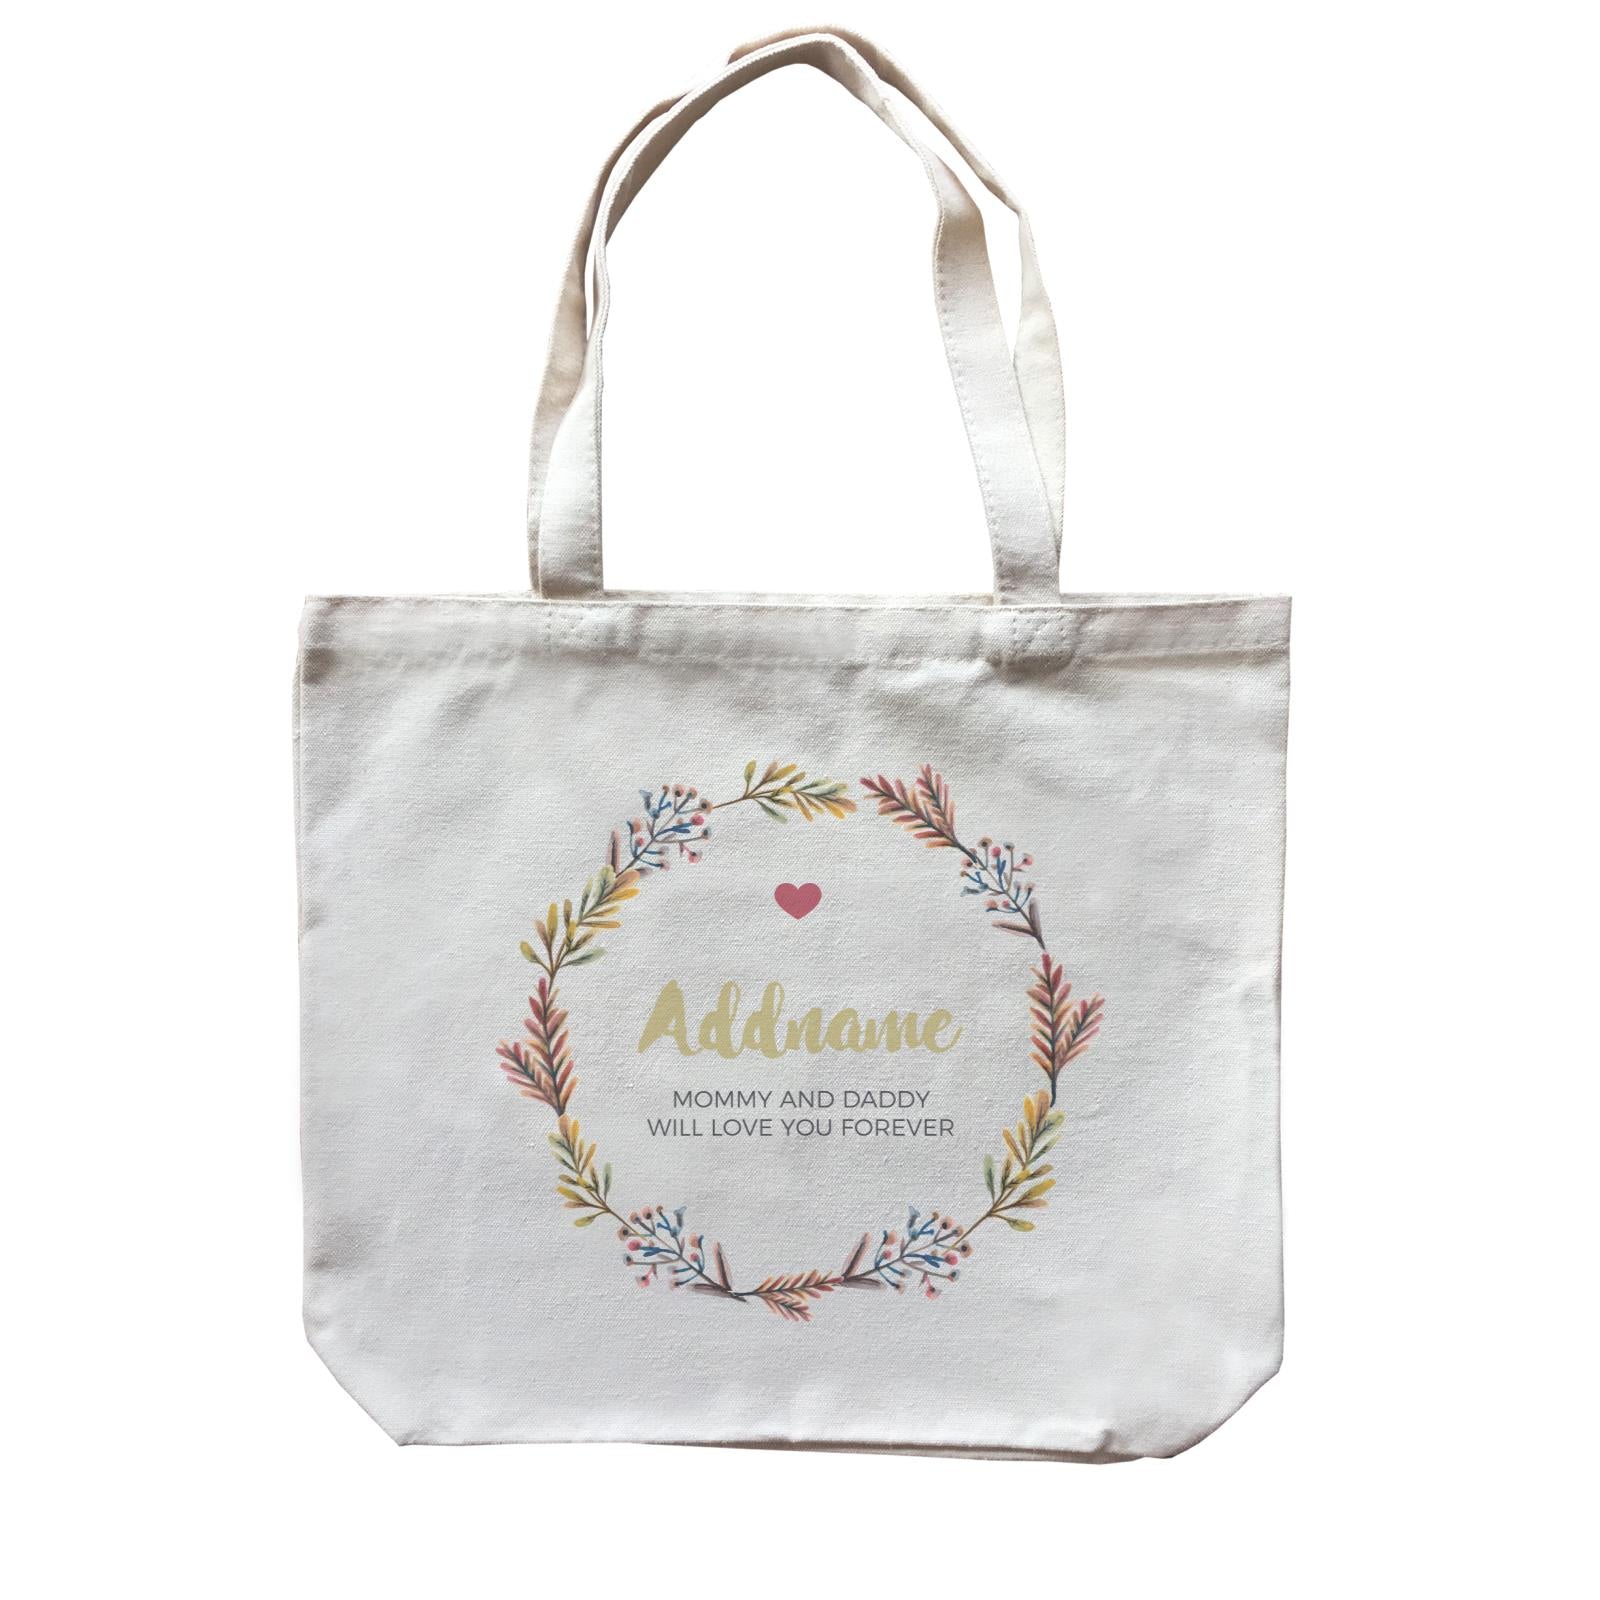 Autumn Colours Wreath Personalizable with Name and Text Canvas Bag